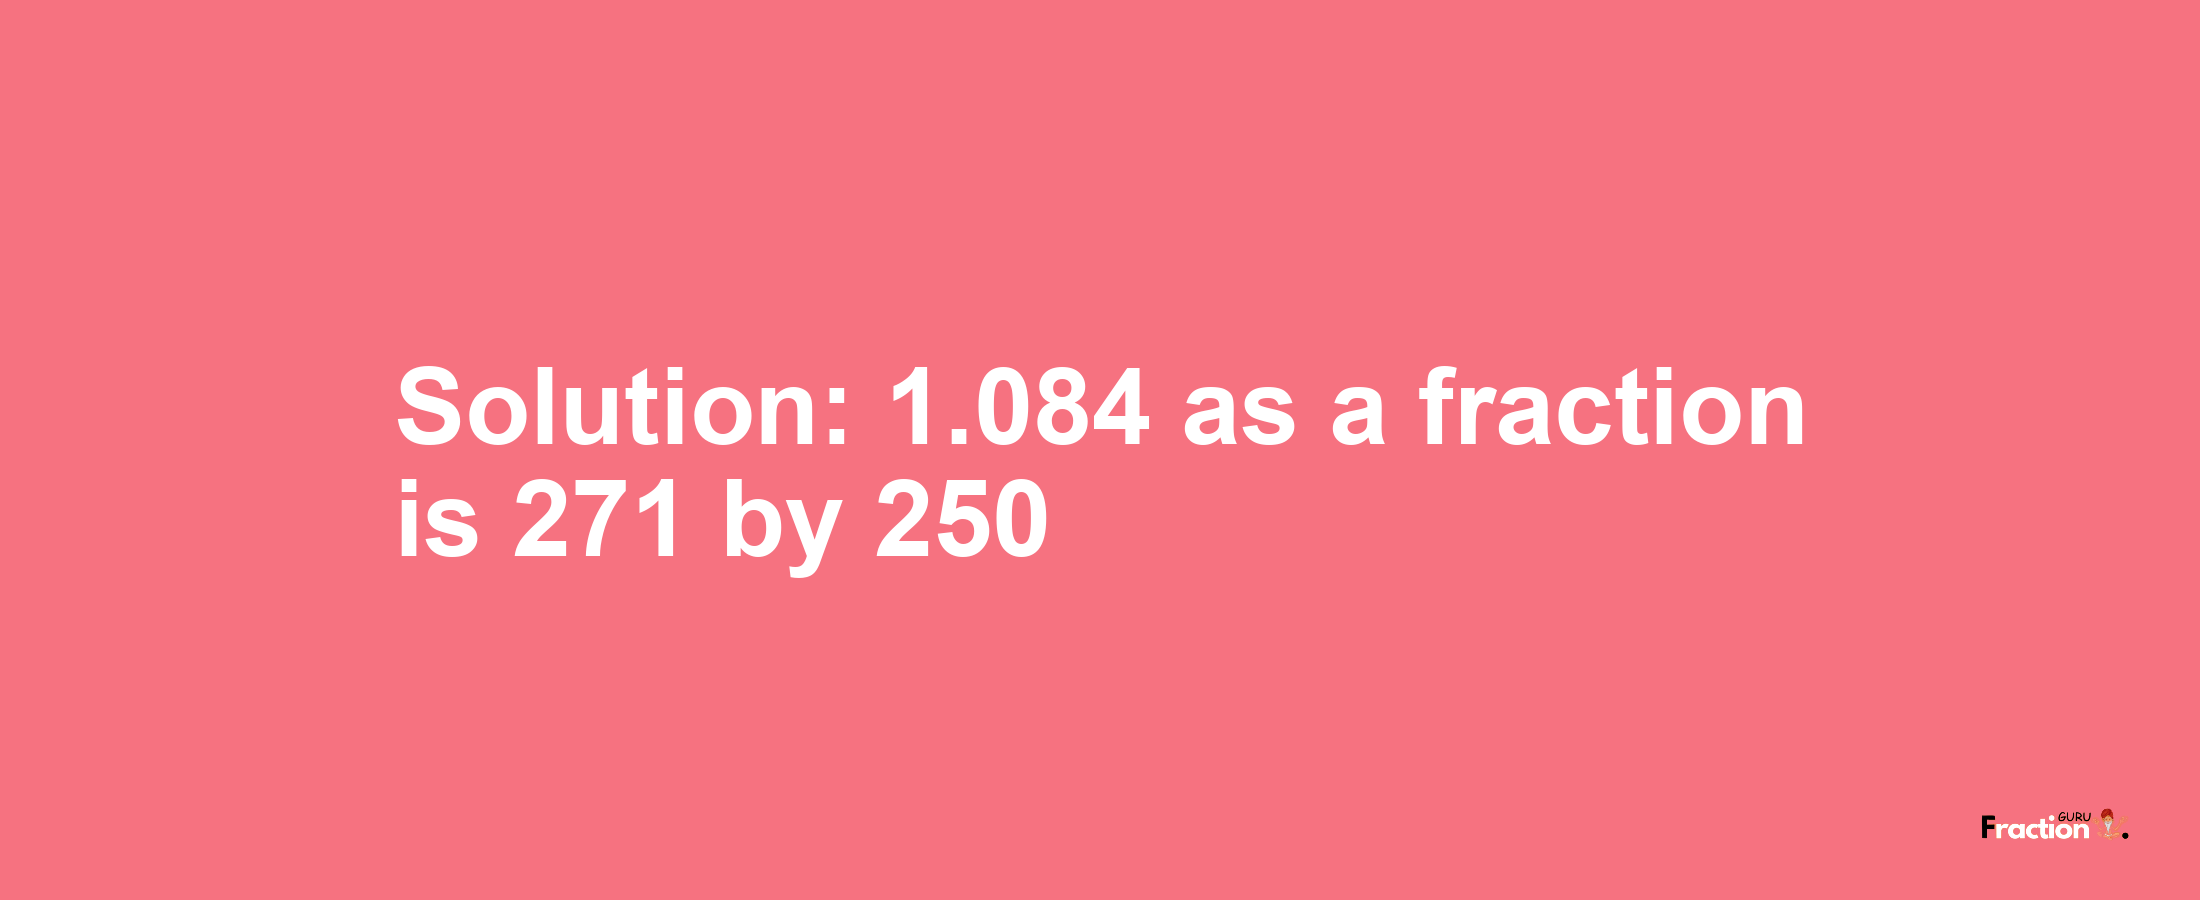 Solution:1.084 as a fraction is 271/250